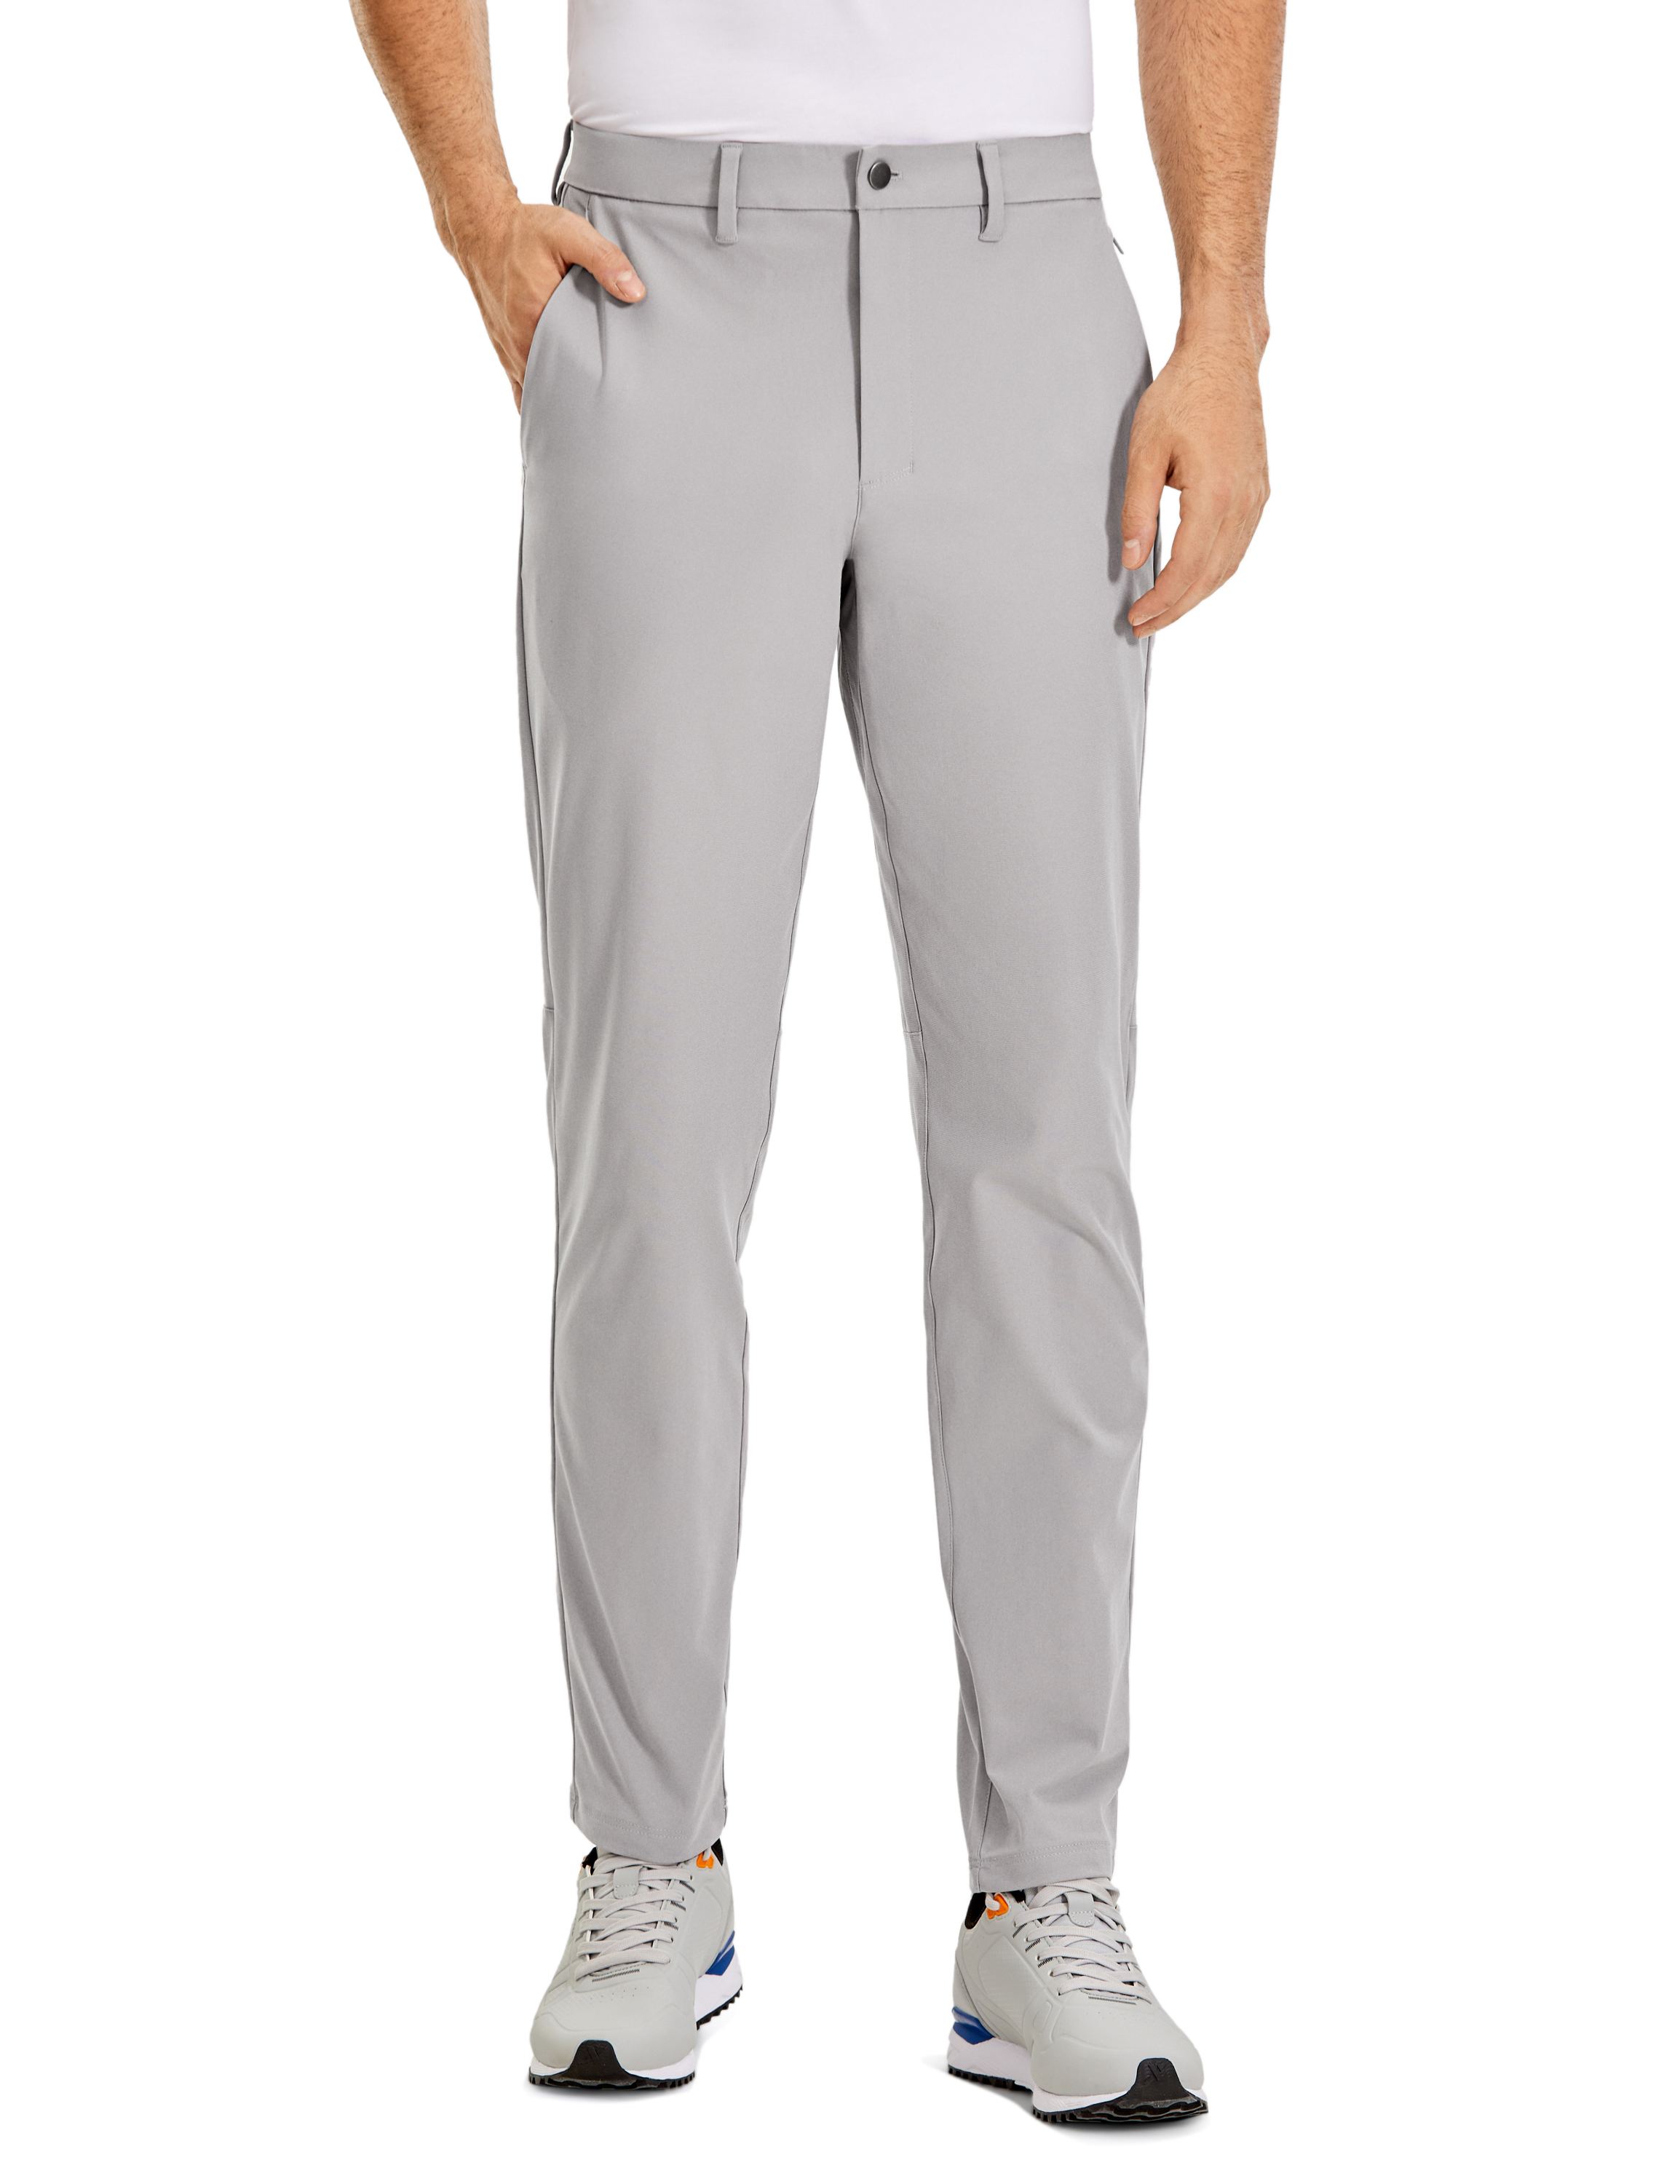 CRZ YOGA All-Day Comfy Classic-Fit Men's 32 Inches Golf Pants Work